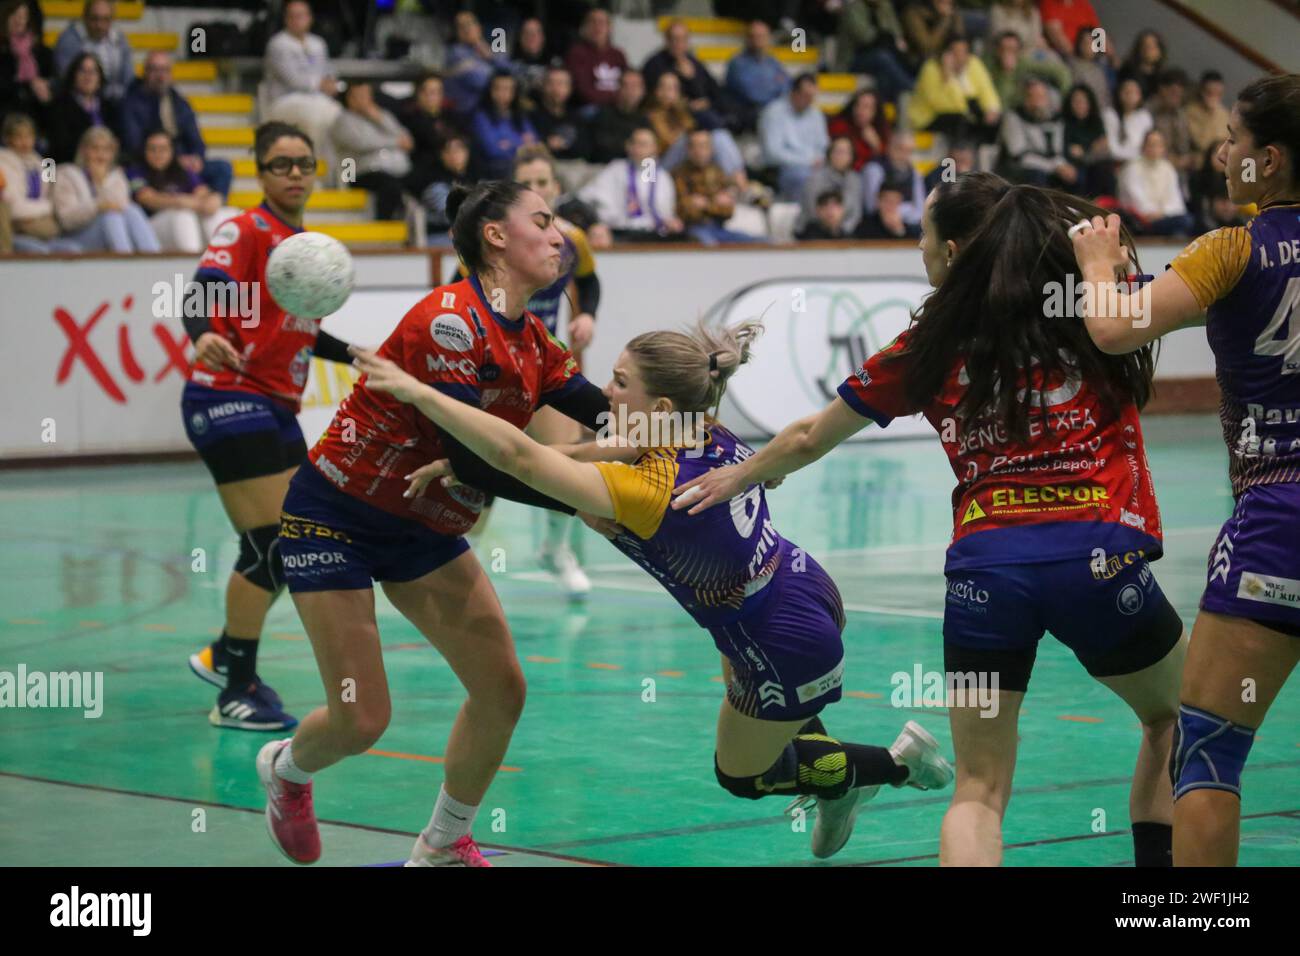 Gijón, Spain. 27th Jan, 2024. The player of Motive.co Gijón Balonmano La Calzada, Dorottya Margit Zentai (66) shoots on goal during the 15th matchday of the Liga Guerreras Iberdrola 2023-24 between Motive.co Gijón Balonmano La Calzada and Conserbas Orbe Rubensa BM. Porriño, on January 27, 2024, at the Arena Pavilion, in Gijón, Spain. (Photo by Alberto Brevers/Pacific Press) Credit: Pacific Press Media Production Corp./Alamy Live News Stock Photo